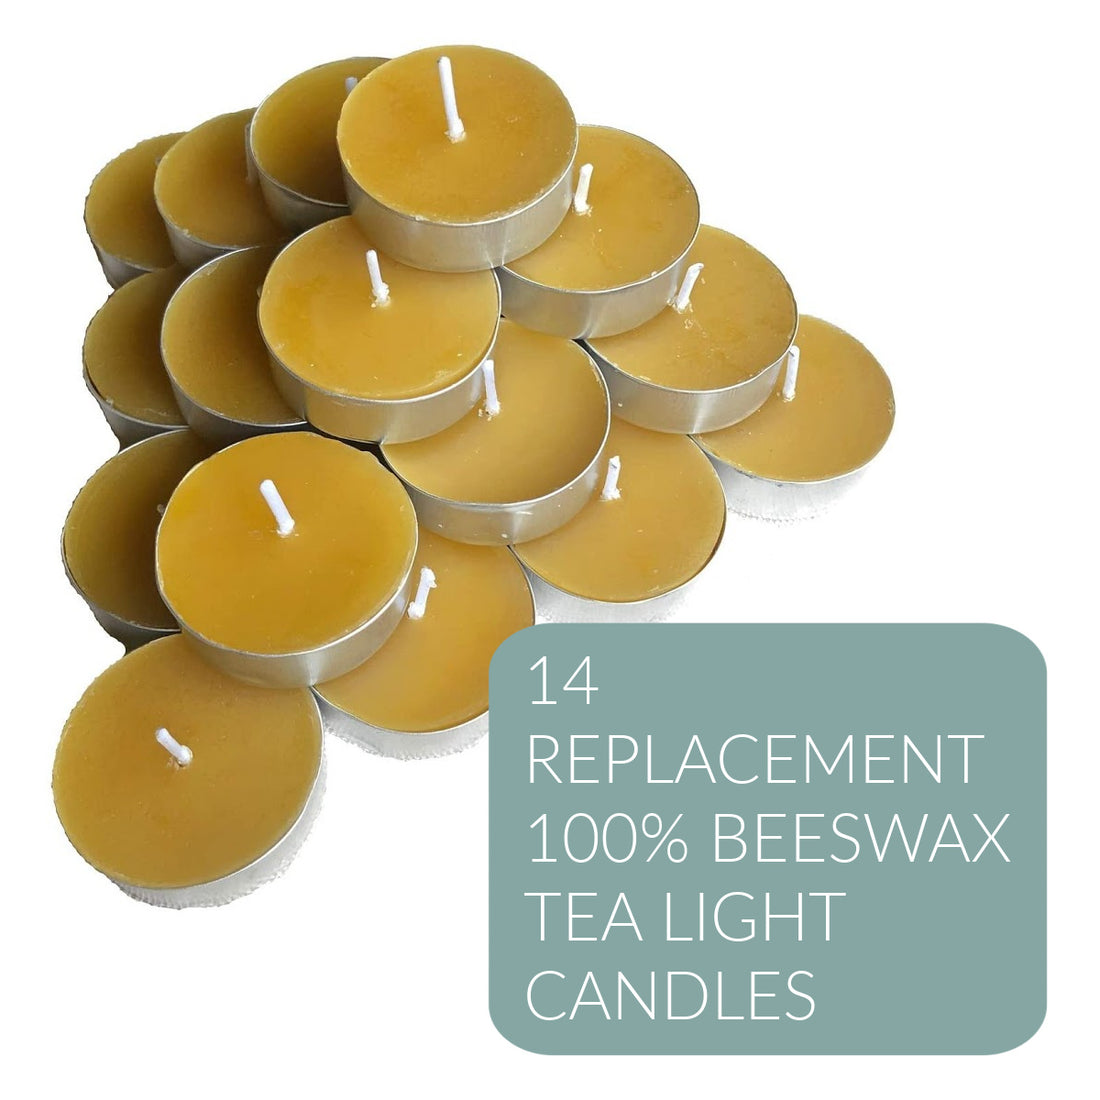 Replacement Beeswax Candles (Set of 14 Tealights)